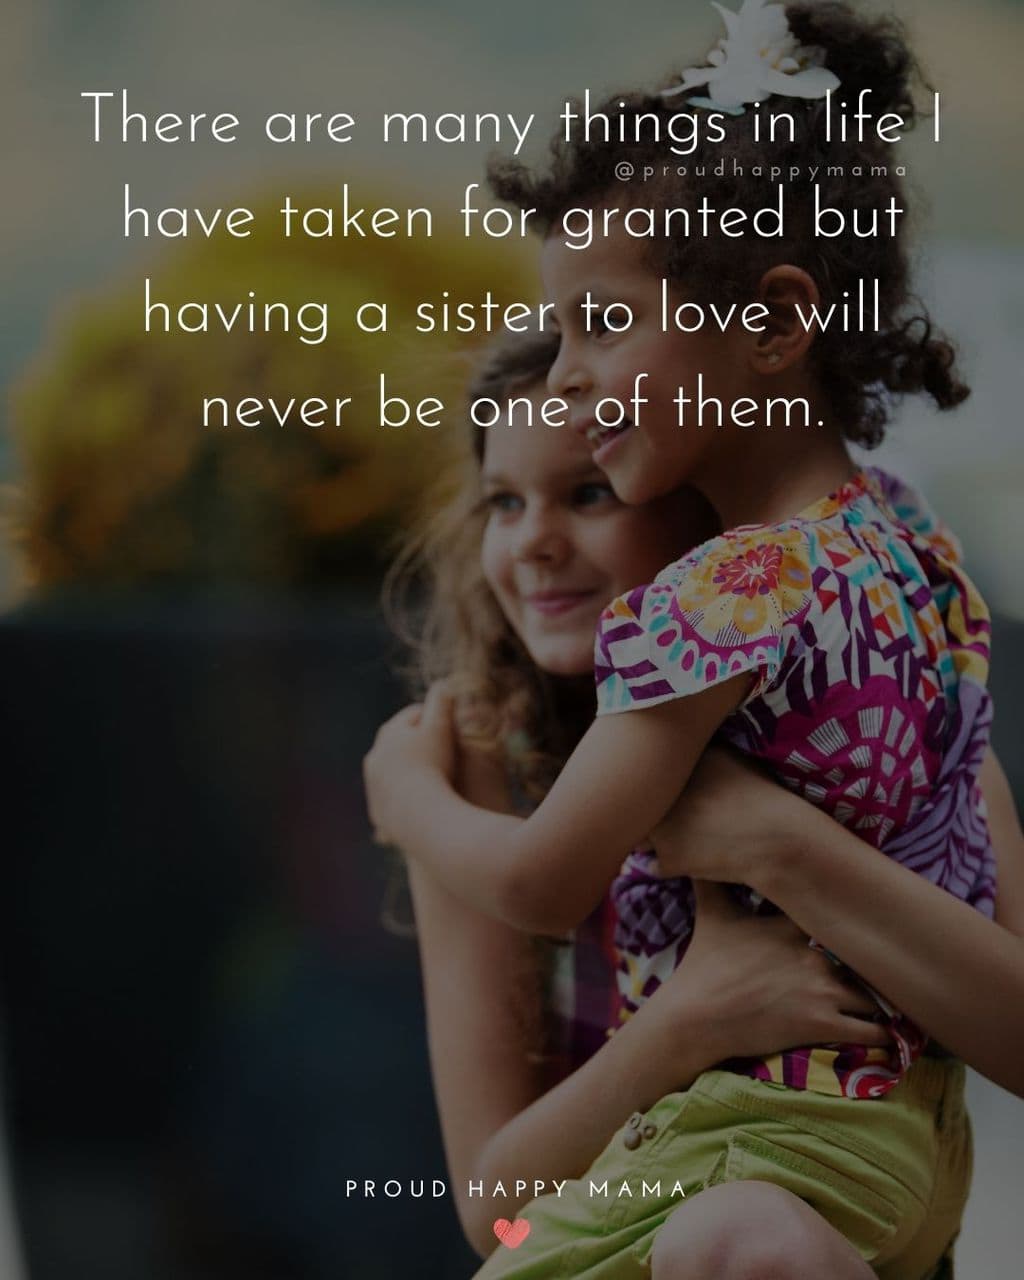 Sister Quotes - There are many things in life I have taken for granted but having a sister to love will never be one of them.